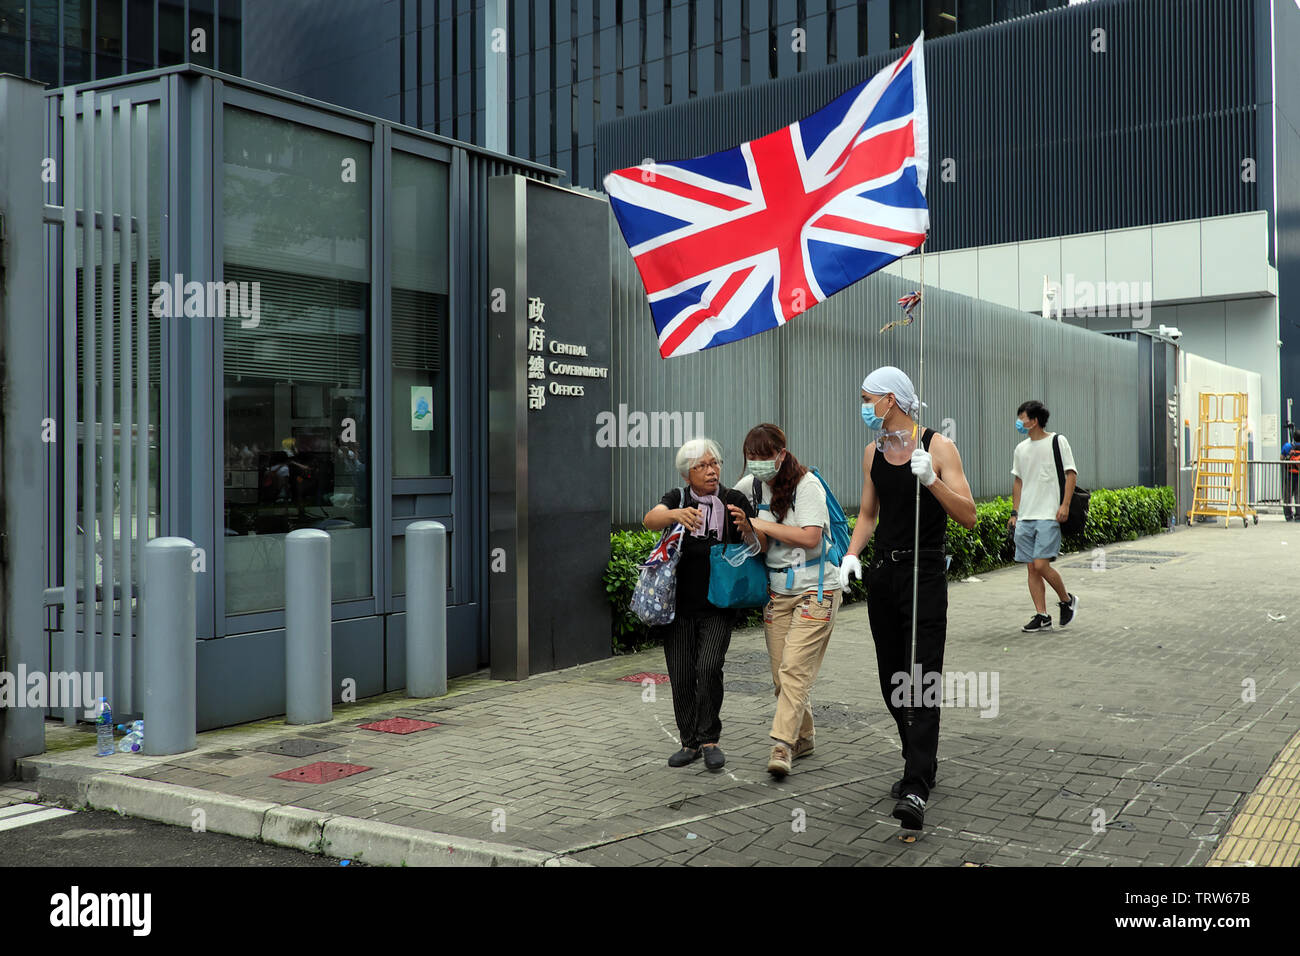 Hong Kong, China. 12th June, 2019. Alexandra Wong with unidentified protesters, one carries the flag of the United Kingdom during protests against extradition law in Hong Kong Credit: Thomas Bertson/Alamy Live News Stock Photo